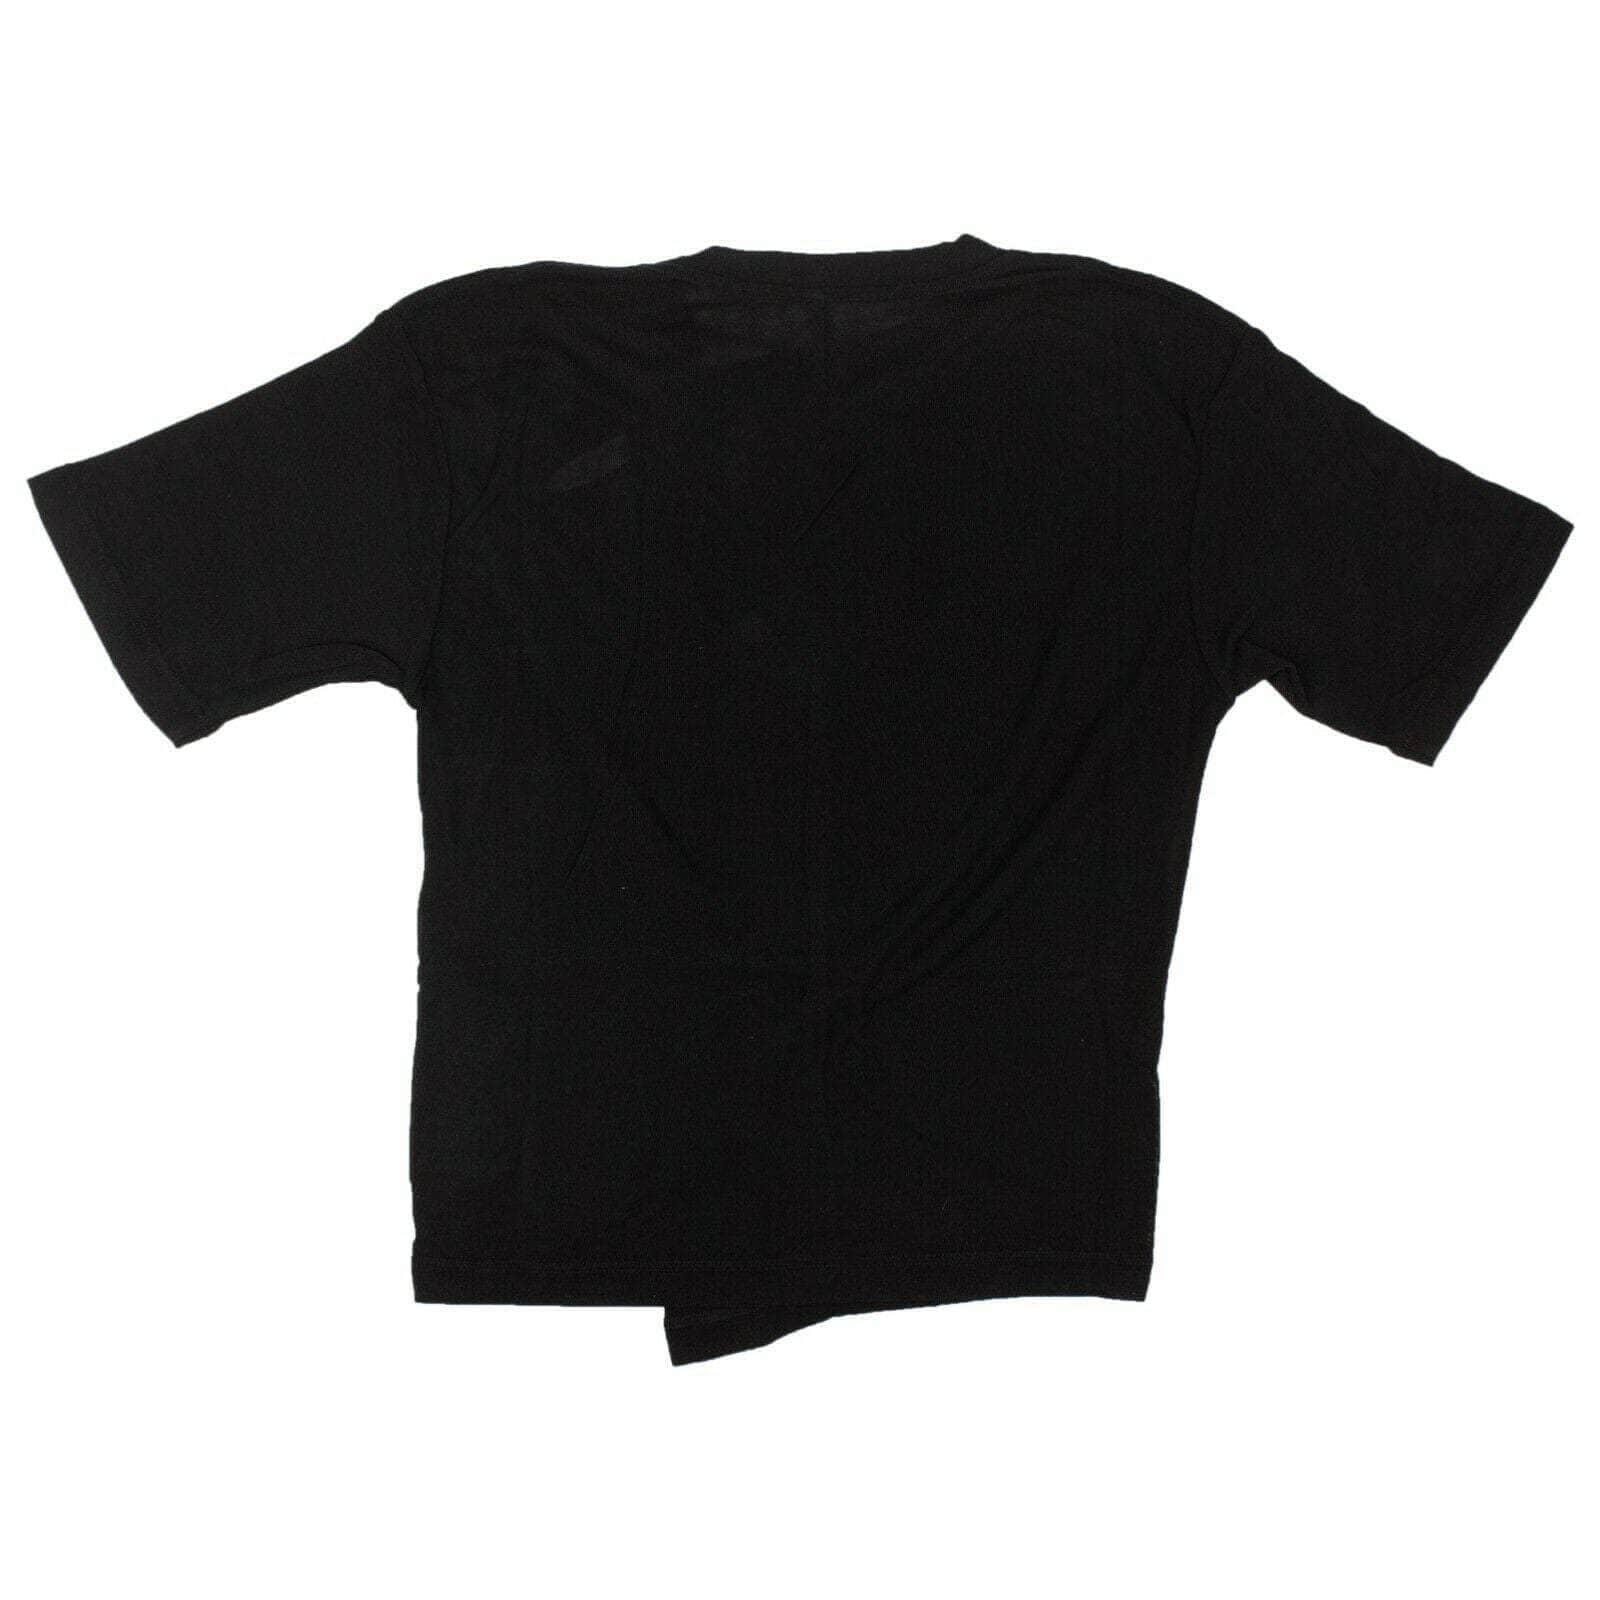 Unravel Project channelenable-all, chicmi, couponcollection, gender-womens, main-clothing, size-m, size-s, size-xs, size-xxs, under-250, unravel-project Black Silk Pintuck T-Shirt